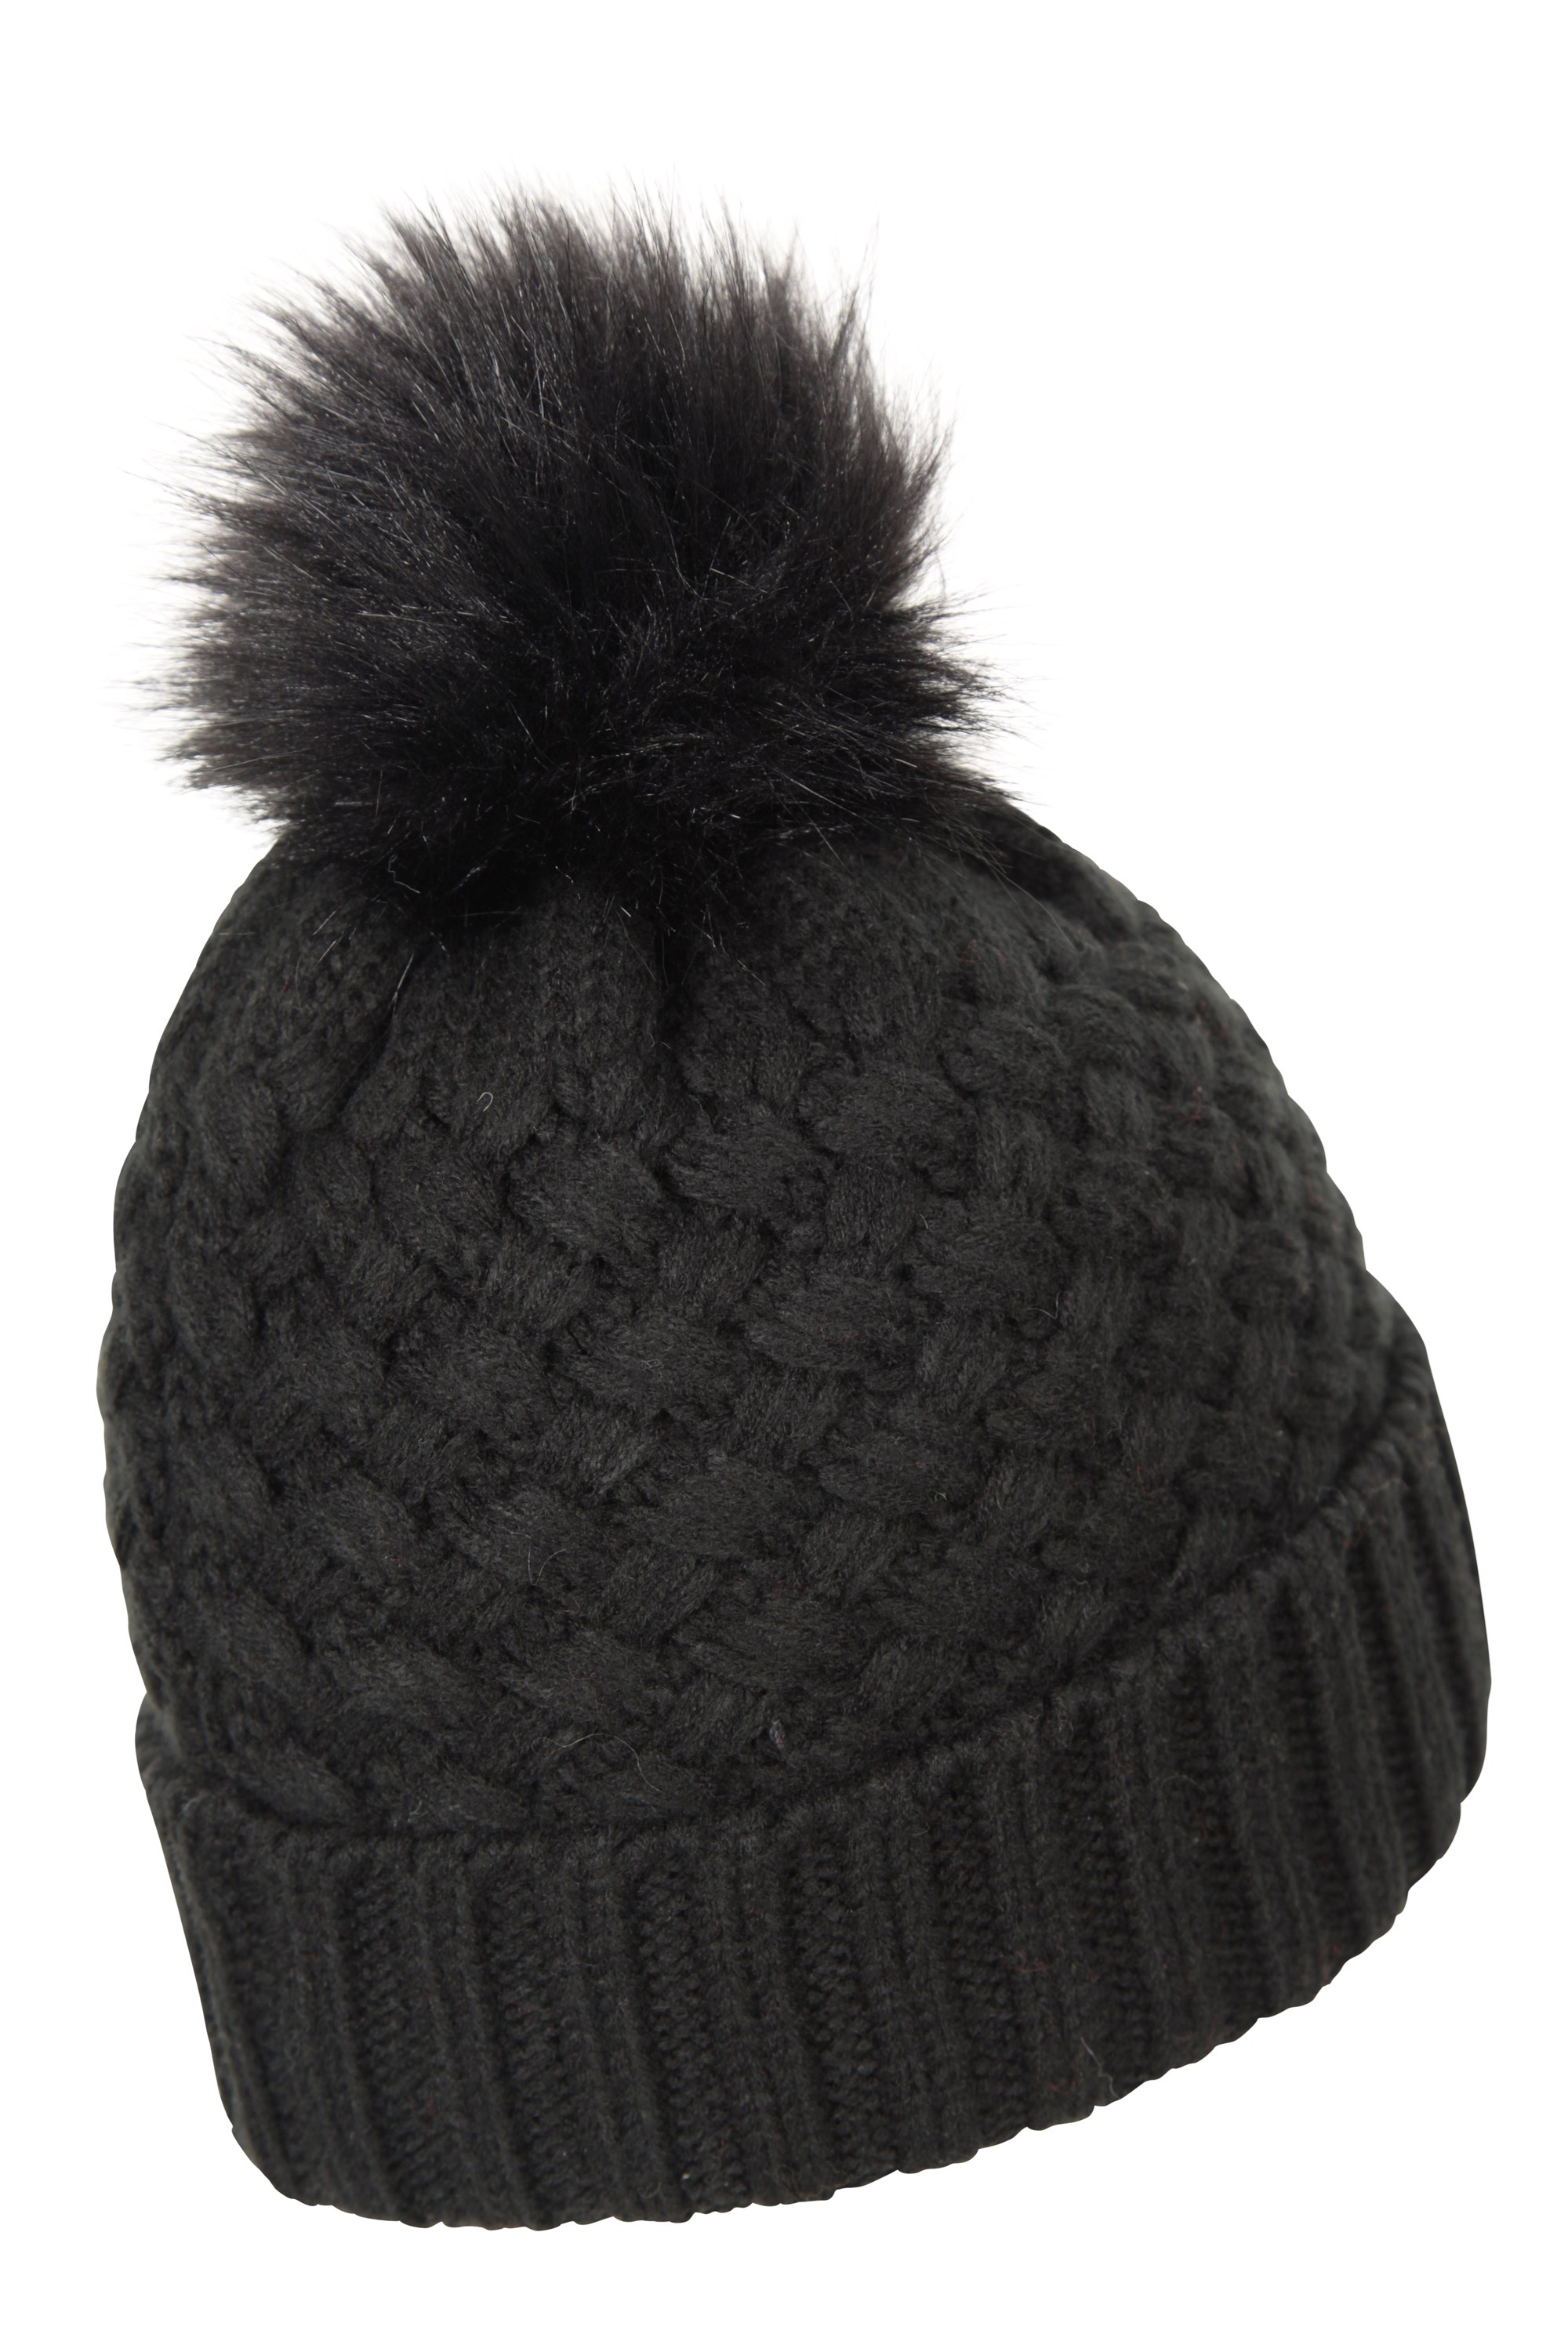 EX COND Mountain Warehouse MOUNTAIN WAREHOUSE WOMENS ONE SIZE BLACK WINTER BOBBLE HAT 